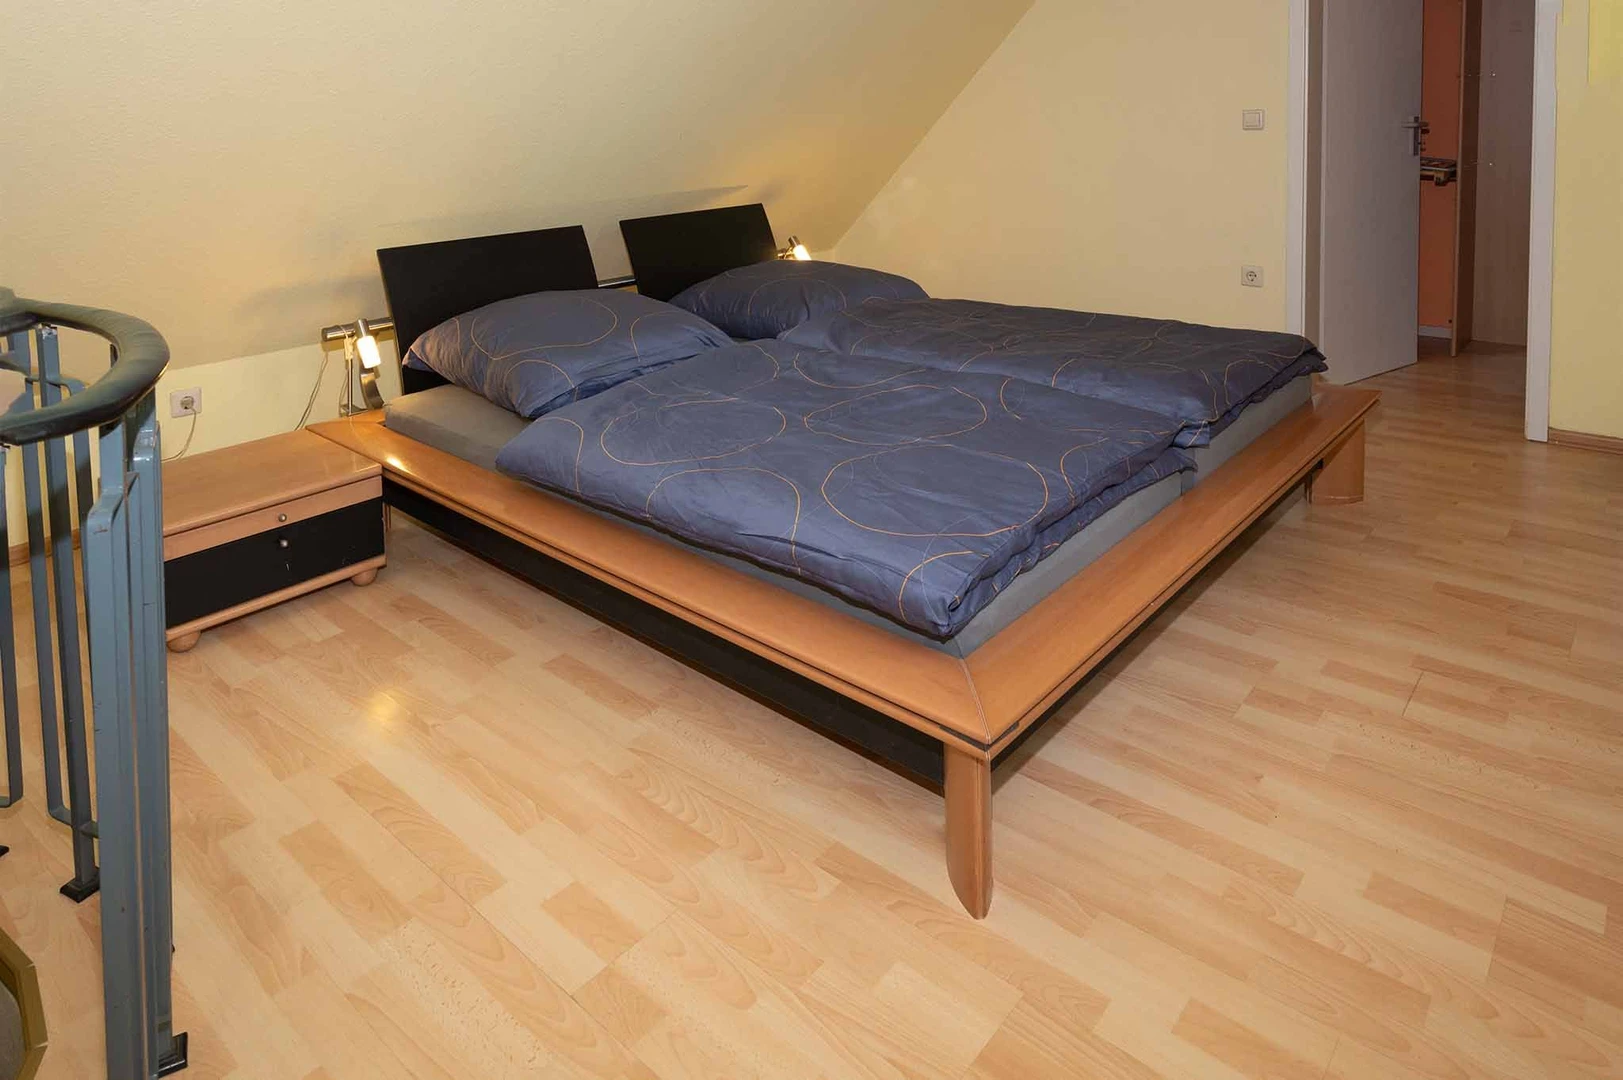 Room for rent in a shared flat in Wolfsburg